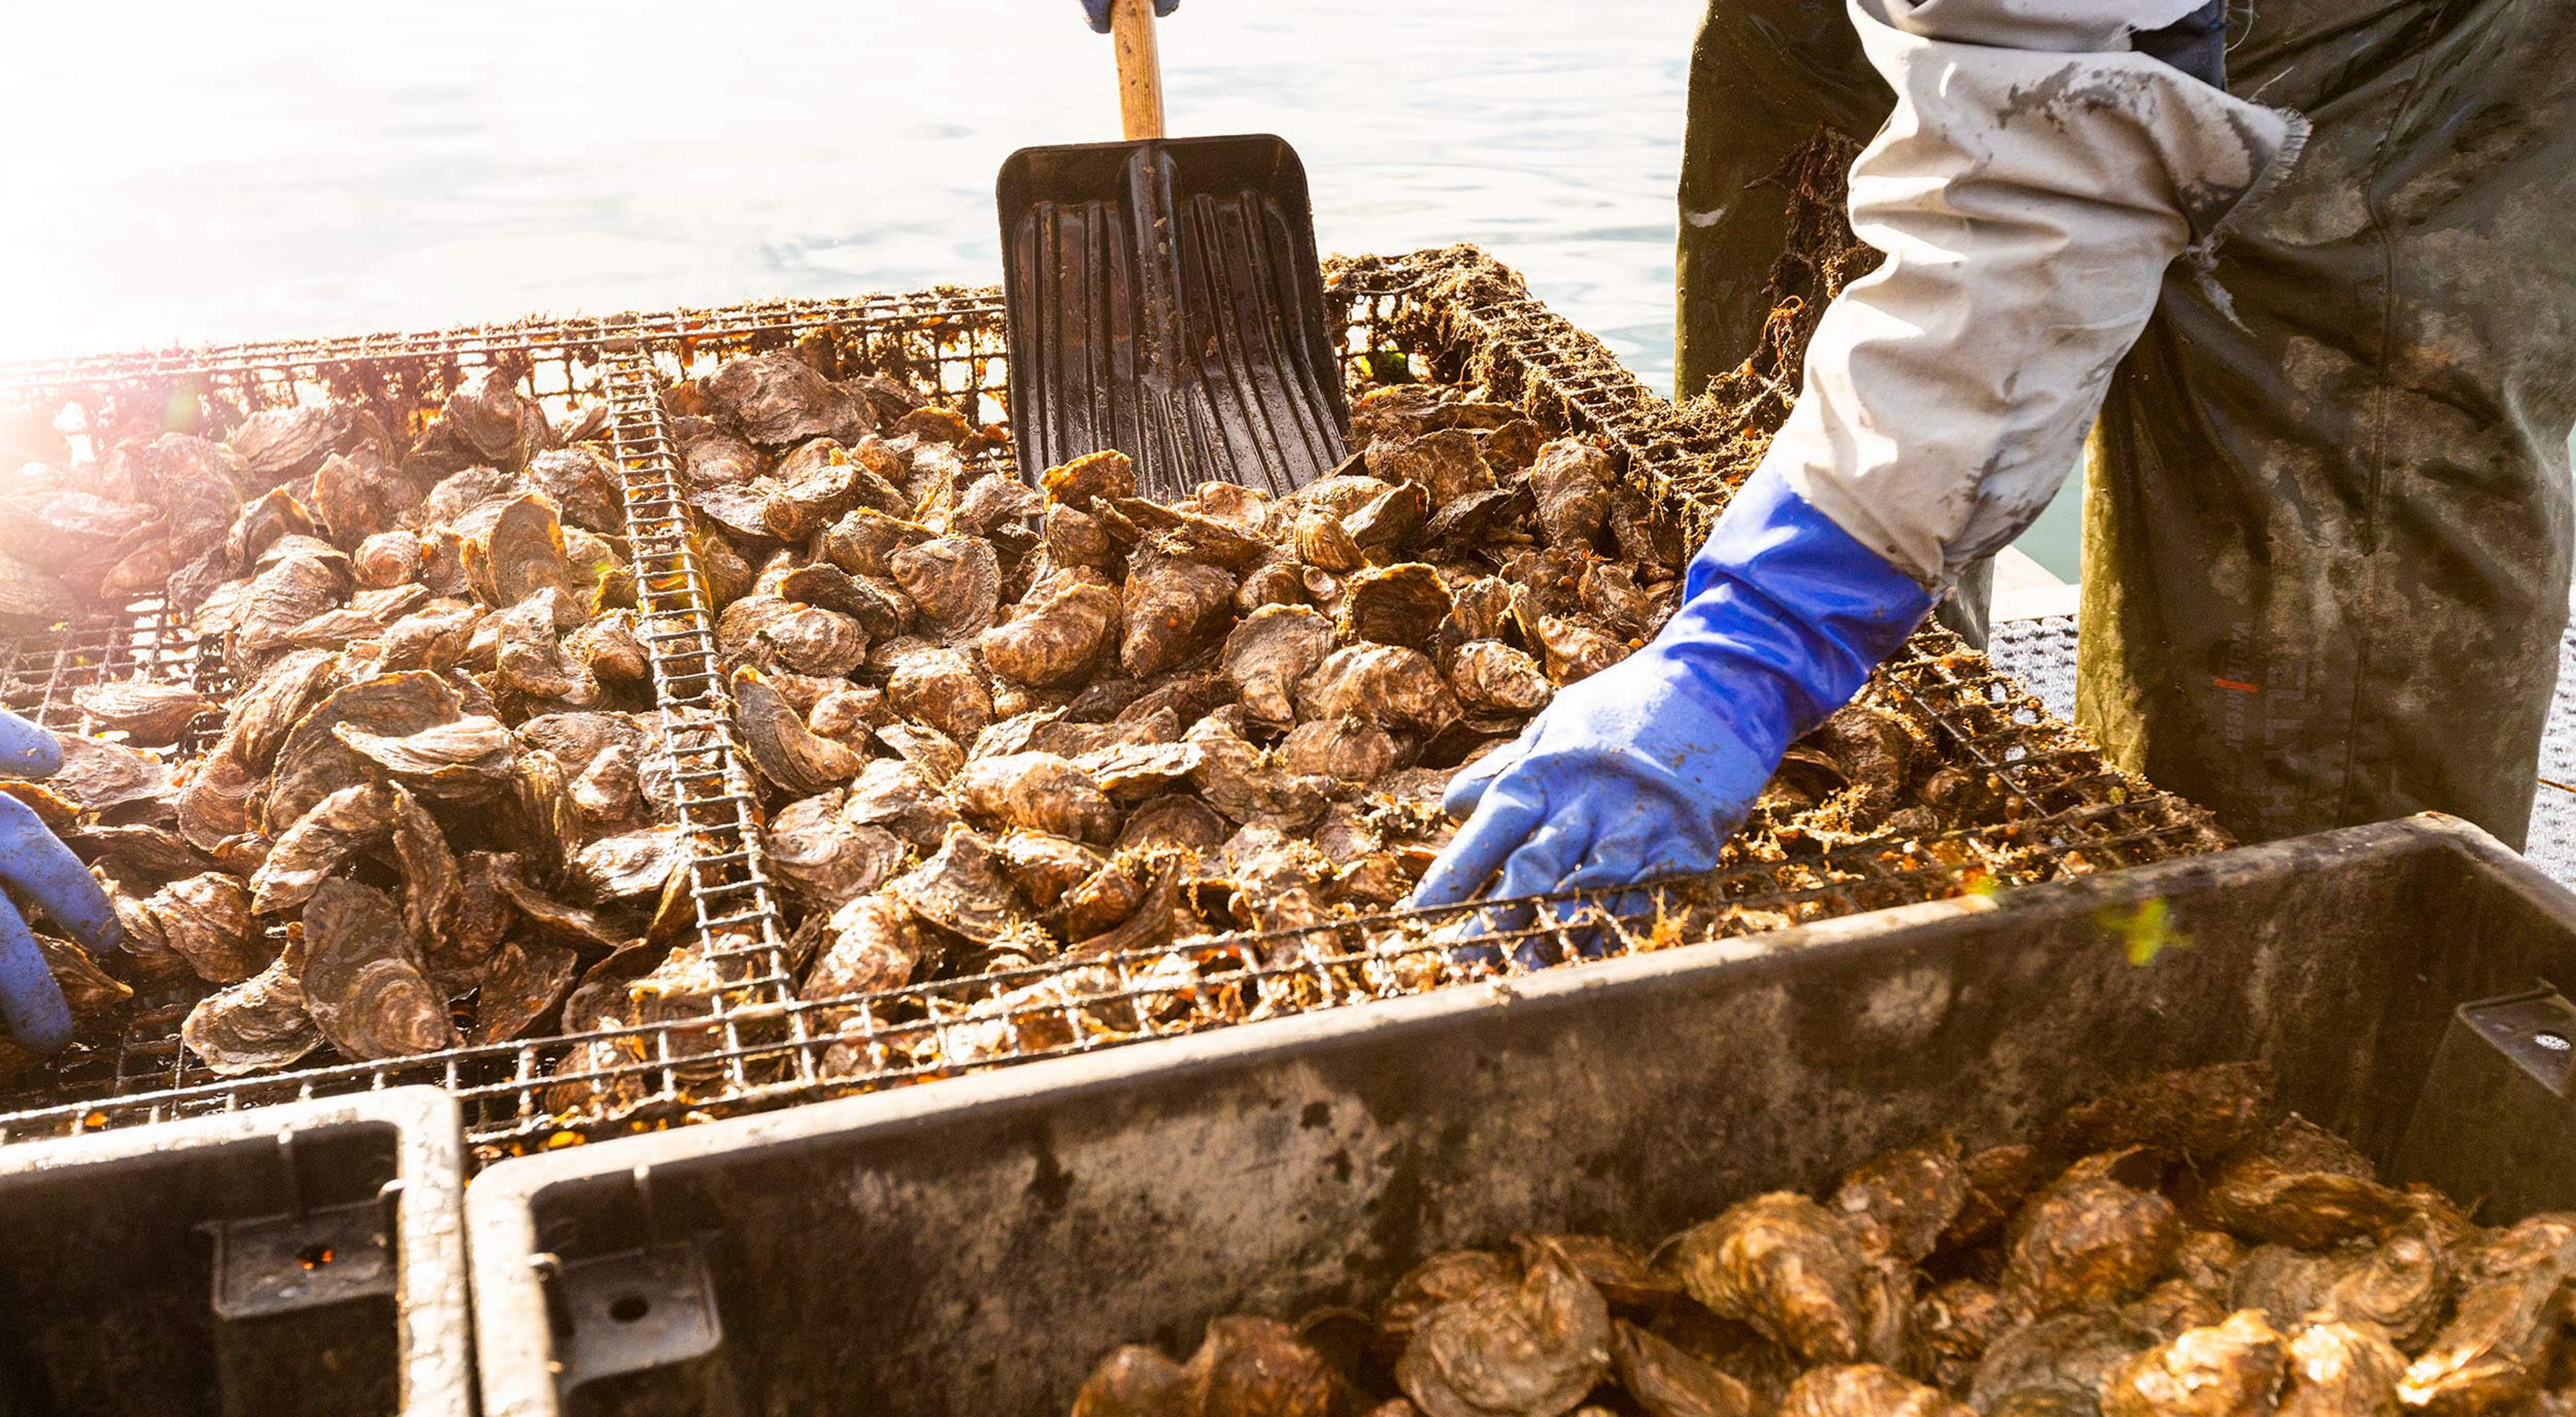 A person scoops up oysters from their cages.